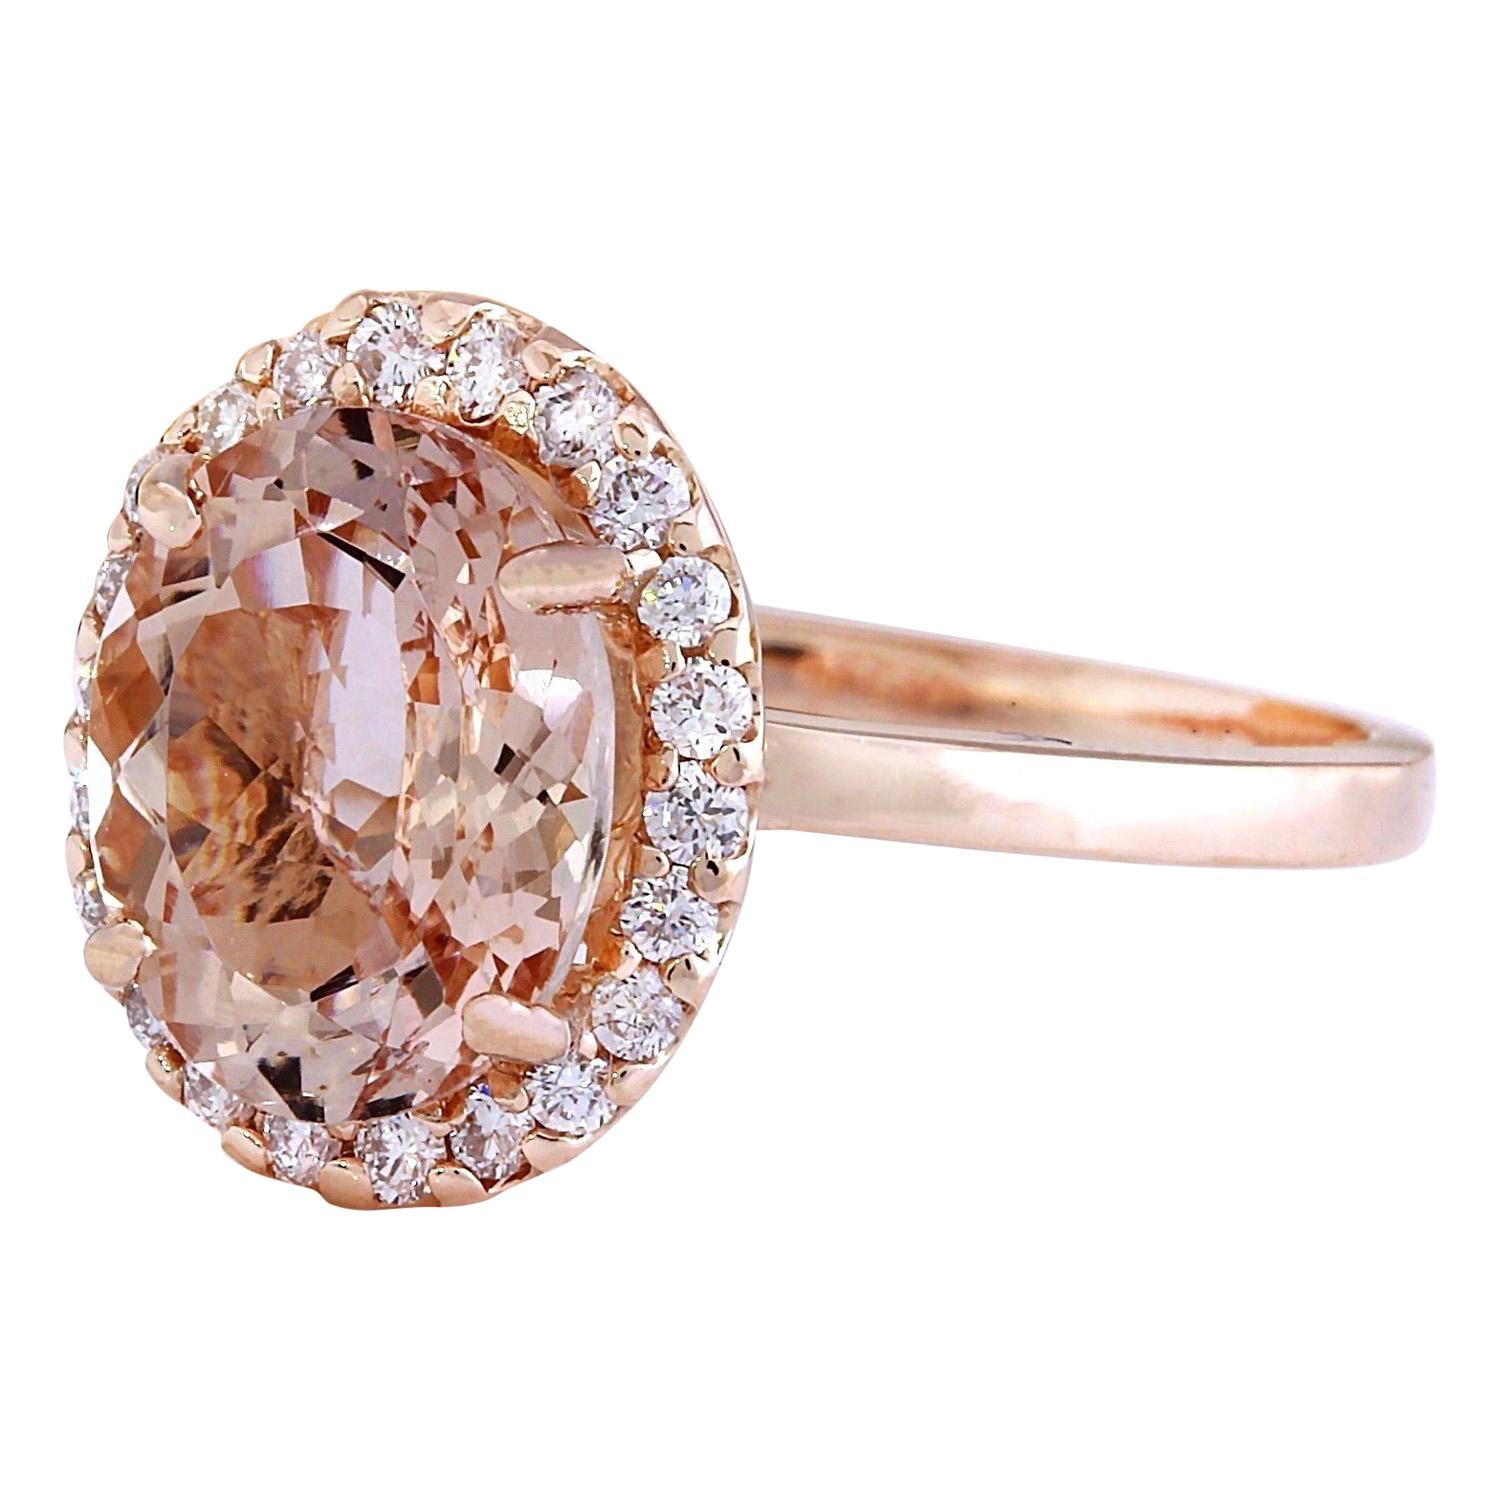 2.87 Carat Natural Morganite 14K Solid Rose Gold Diamond Ring
 Item Type: Ring
 Item Style: Cocktail
 Material: 14K Rose Gold
 Mainstone: Morganite
 Stone Color: Peach
 Stone Weight: 2.57 Carat
 Stone Shape: Oval
 Stone Quantity: 1
 Stone